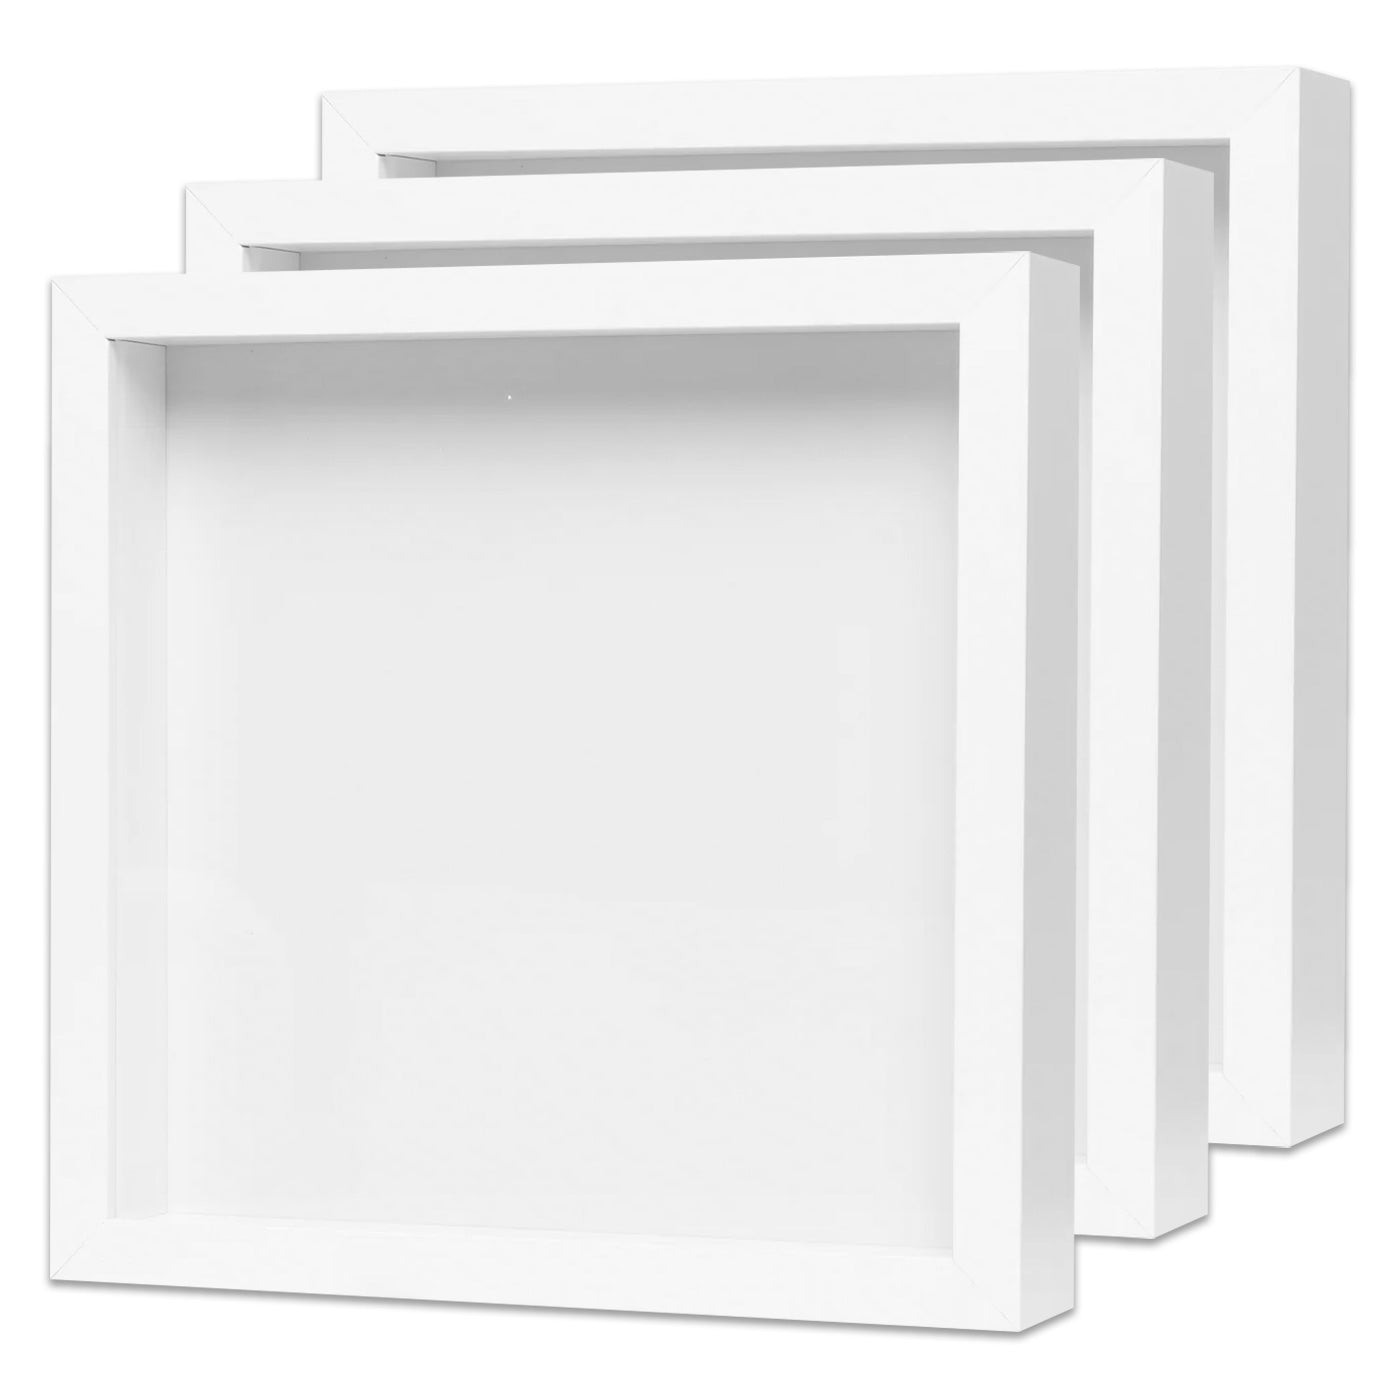 Art Shadow-Box 1-3/8in depth White Wood 12x12 frame - Picture Frames, Photo  Albums, Personalized and Engraved Digital Photo Gifts - SendAFrame